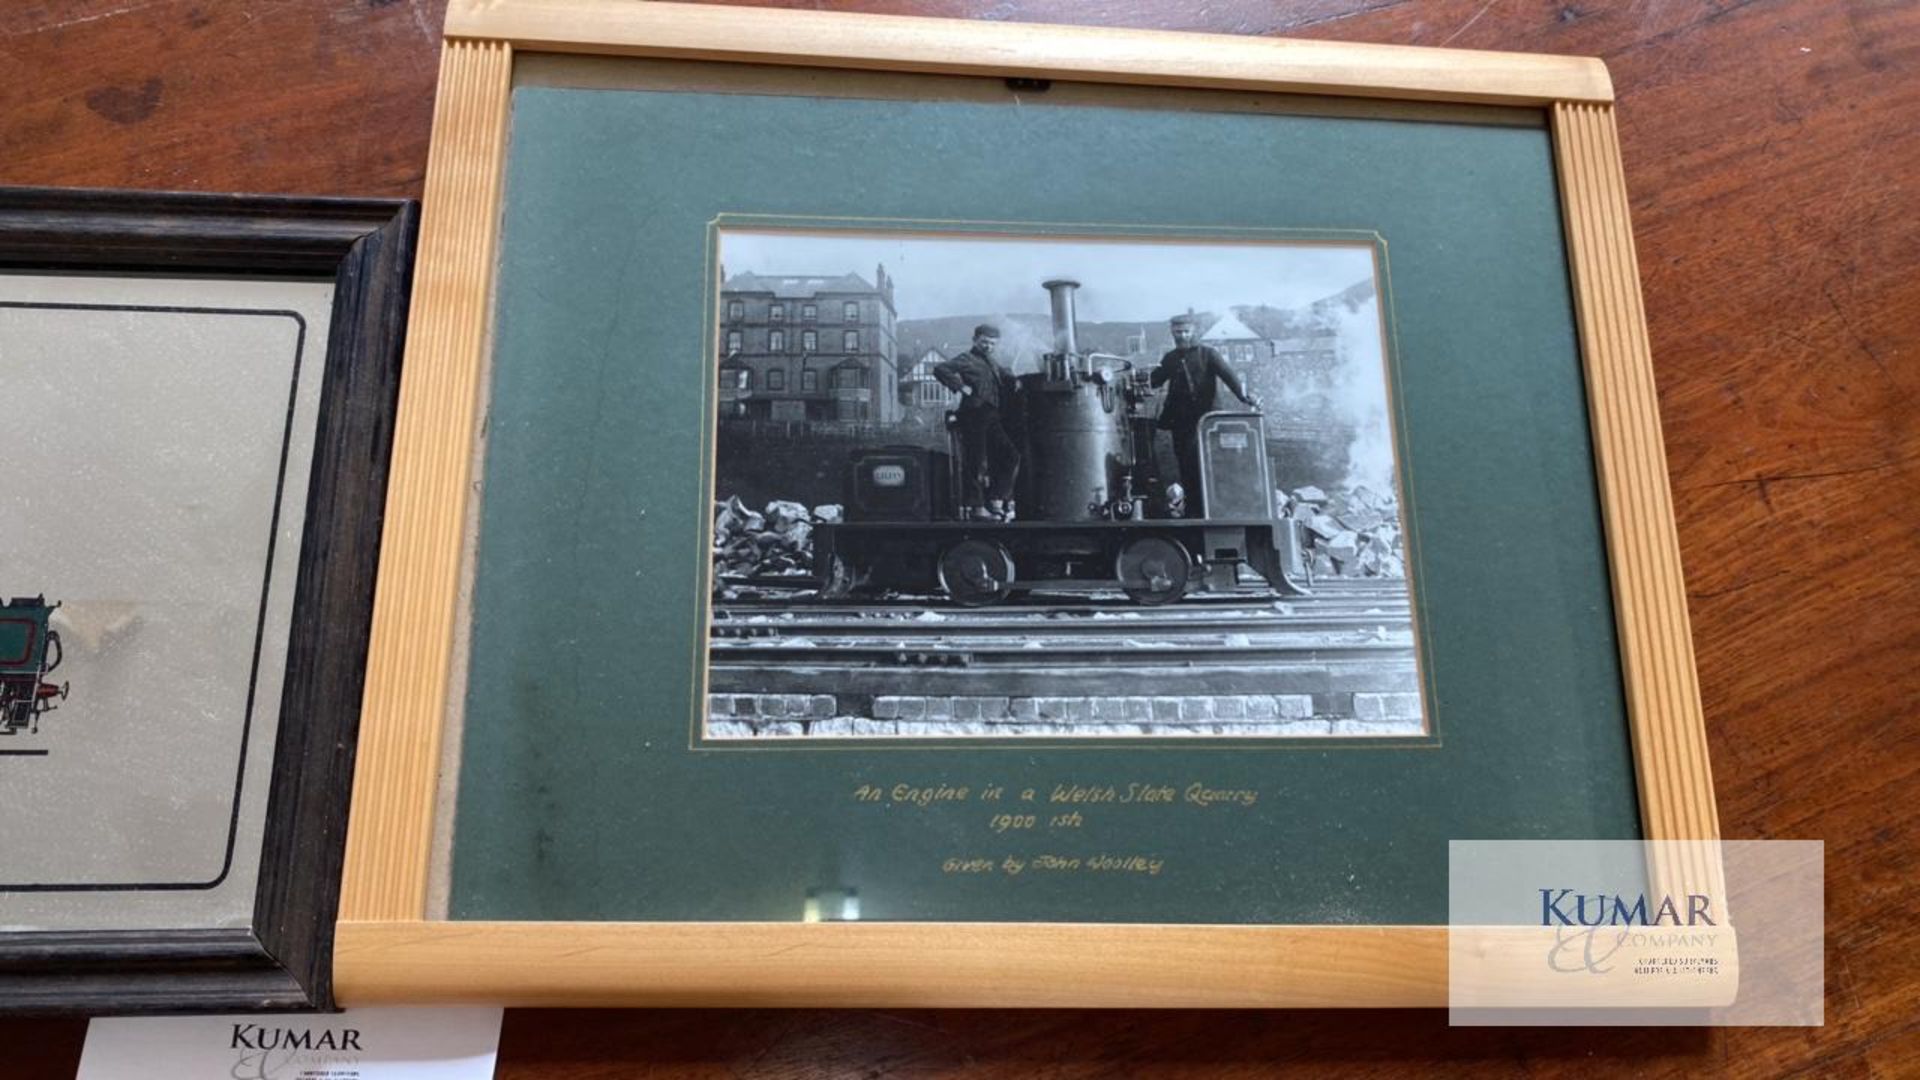 Train pictures in frames - Image 11 of 18